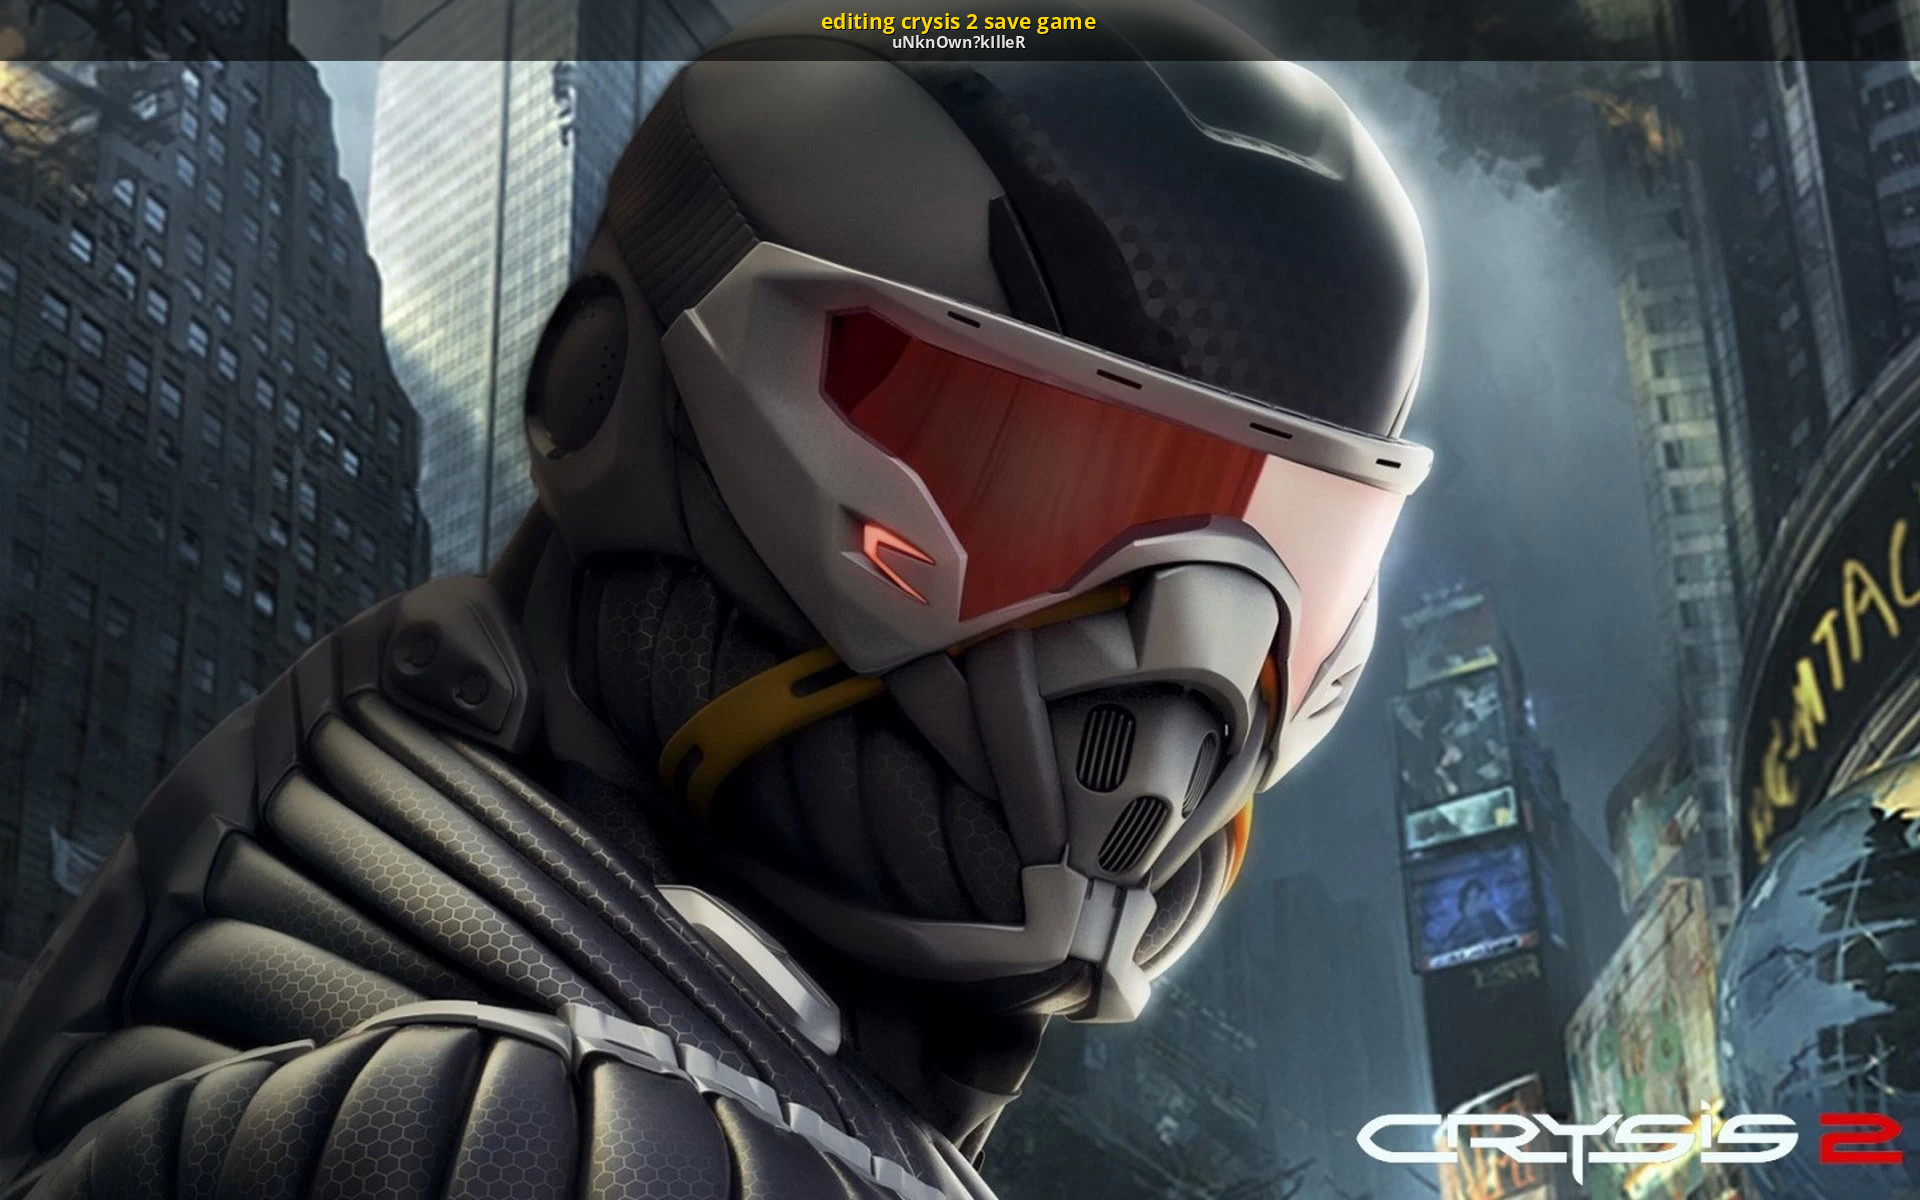 crysis 2 activation key free download